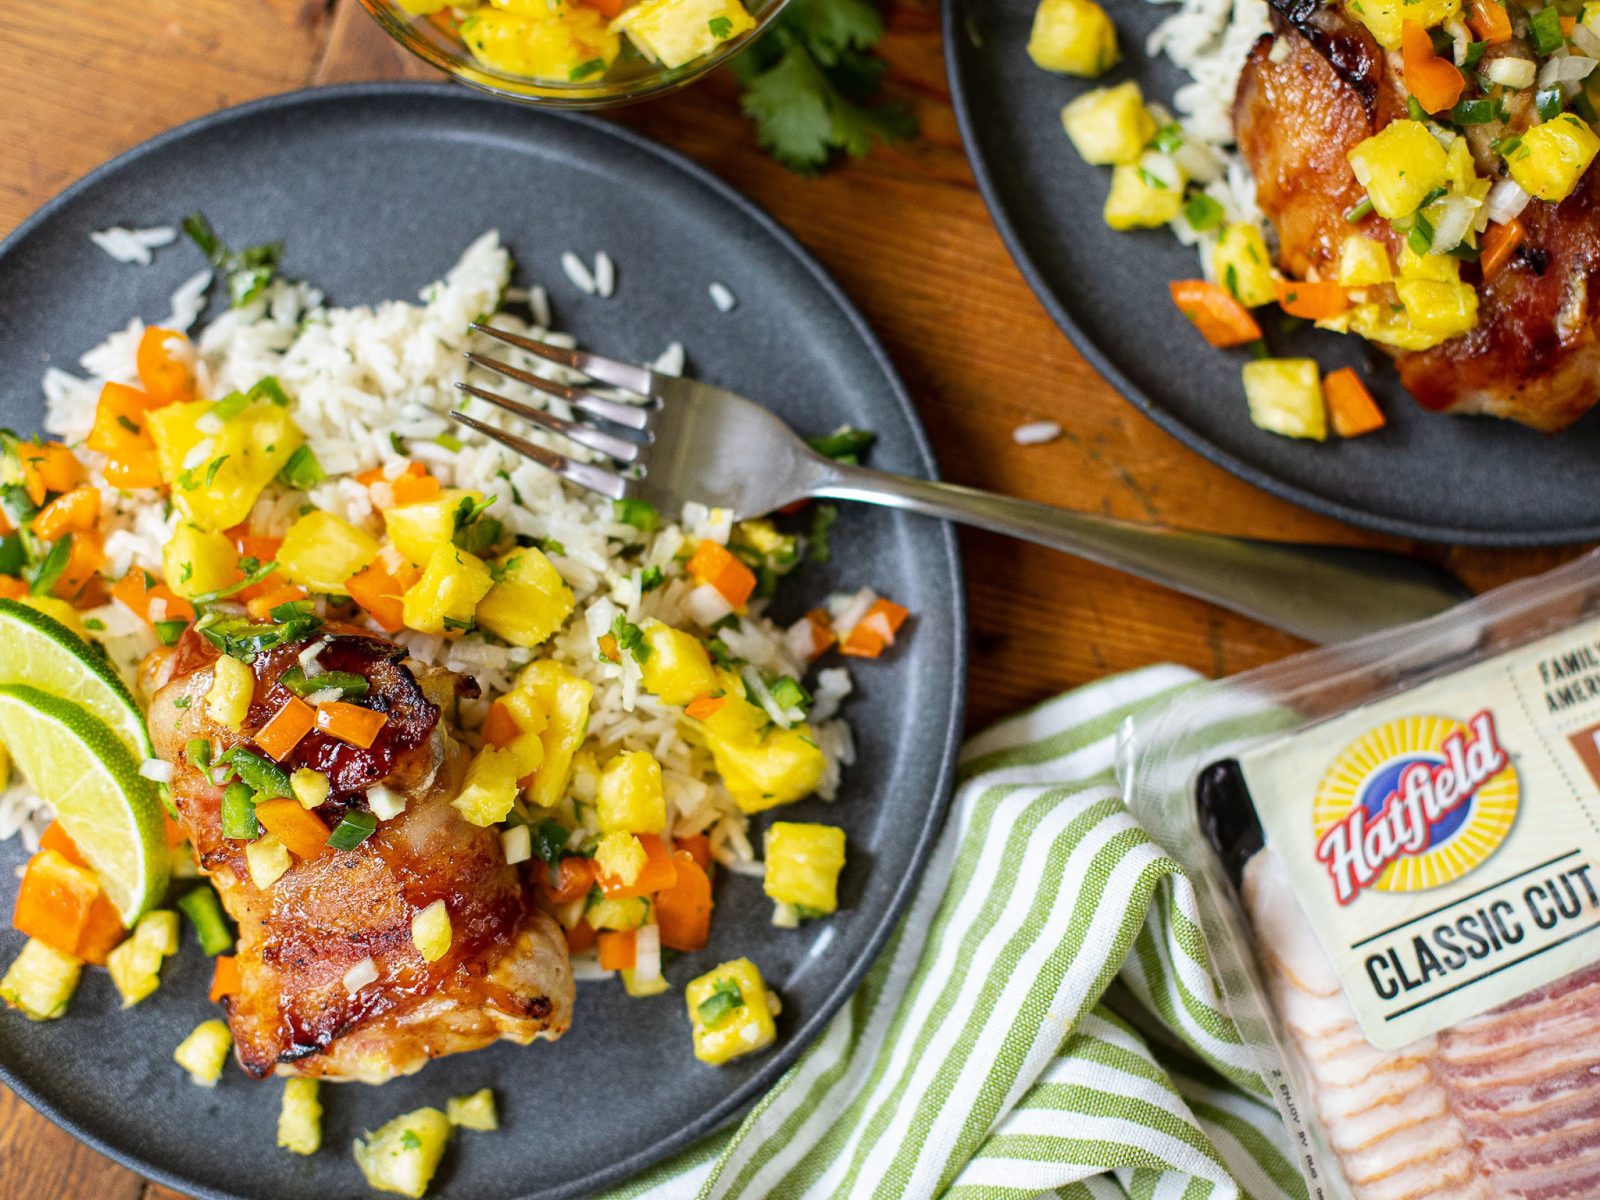 Hatfield Bacon Is BOGO This Week At Publix – Grab Some For My Bacon Wrapped Aloha Chicken Bombs